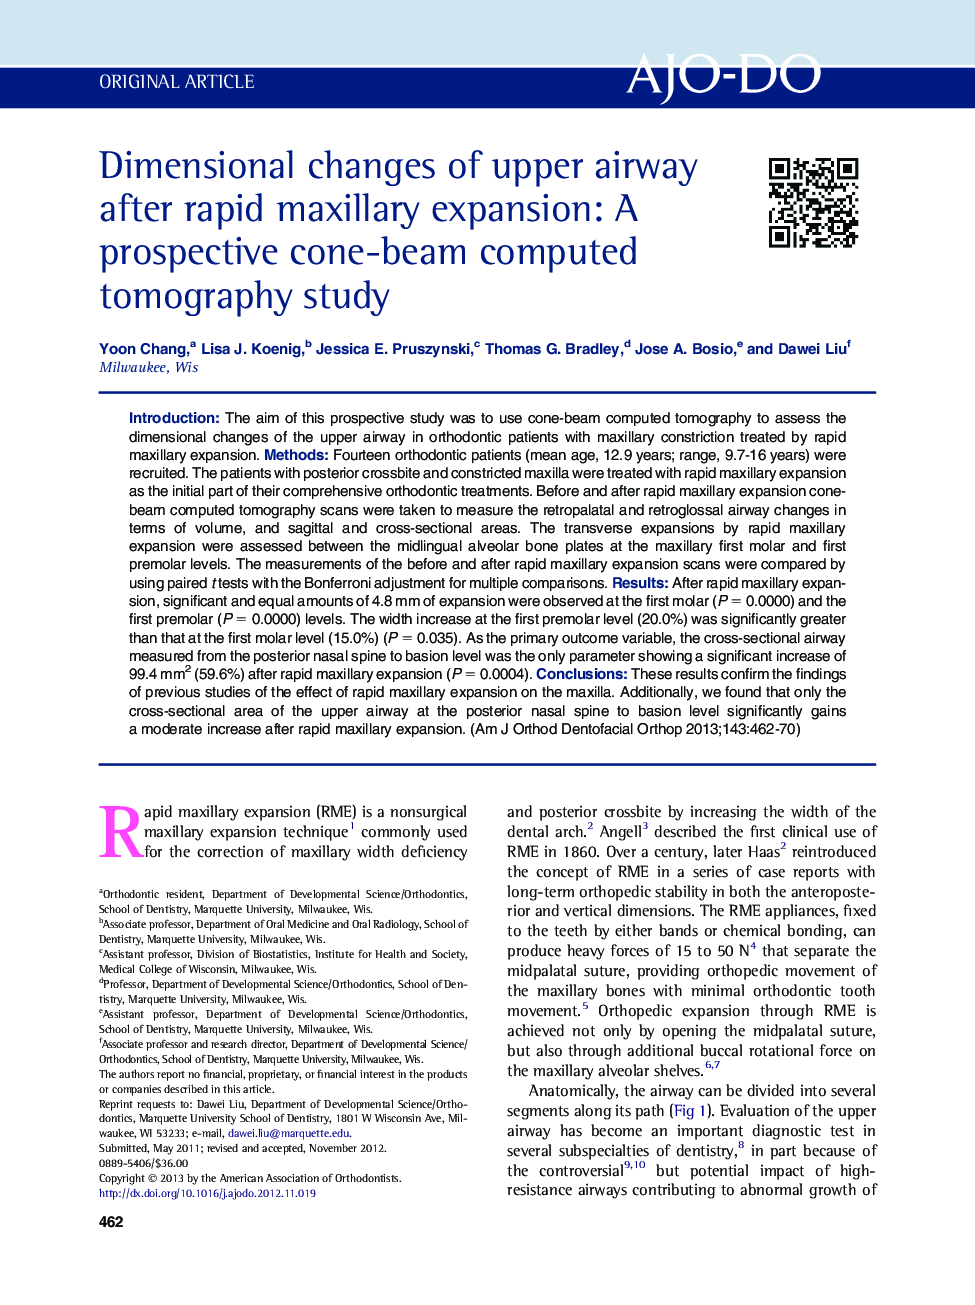 Dimensional changes of upper airway after rapid maxillary expansion: A prospective cone-beam computed tomography study